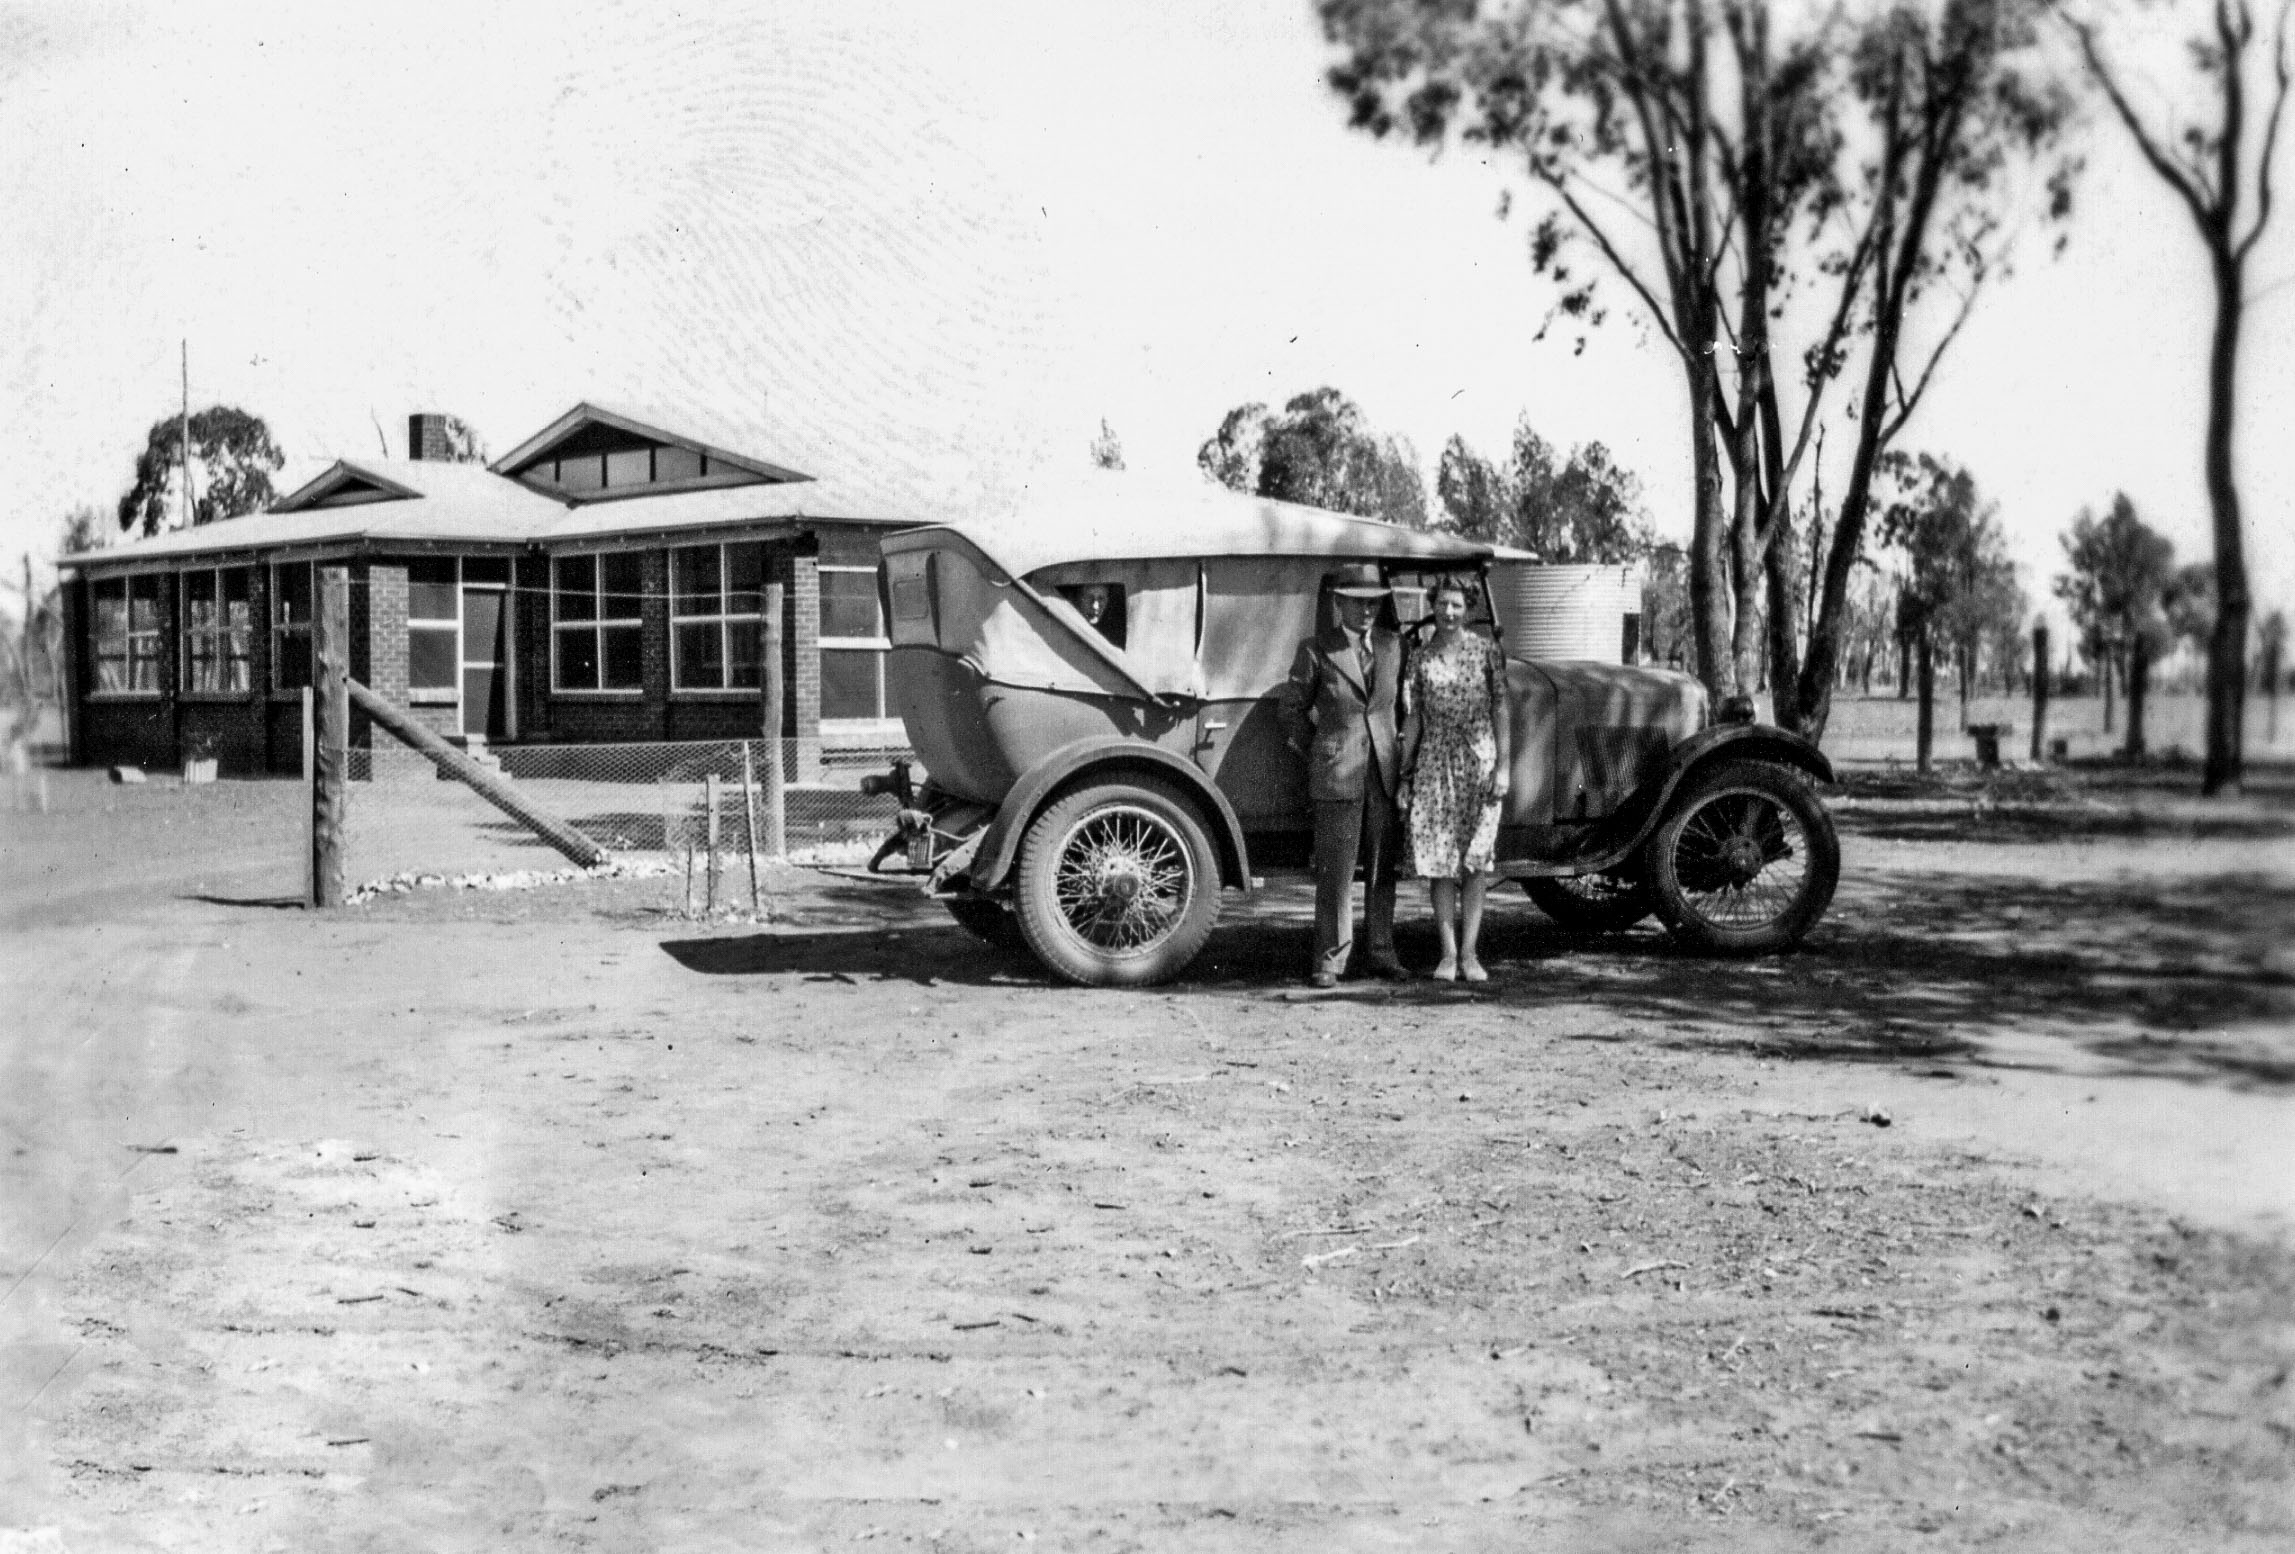 My parents Herb and Margaret Rynhart in front of the house on their property ‘Tunstall’ near Wee Waa in 1946.